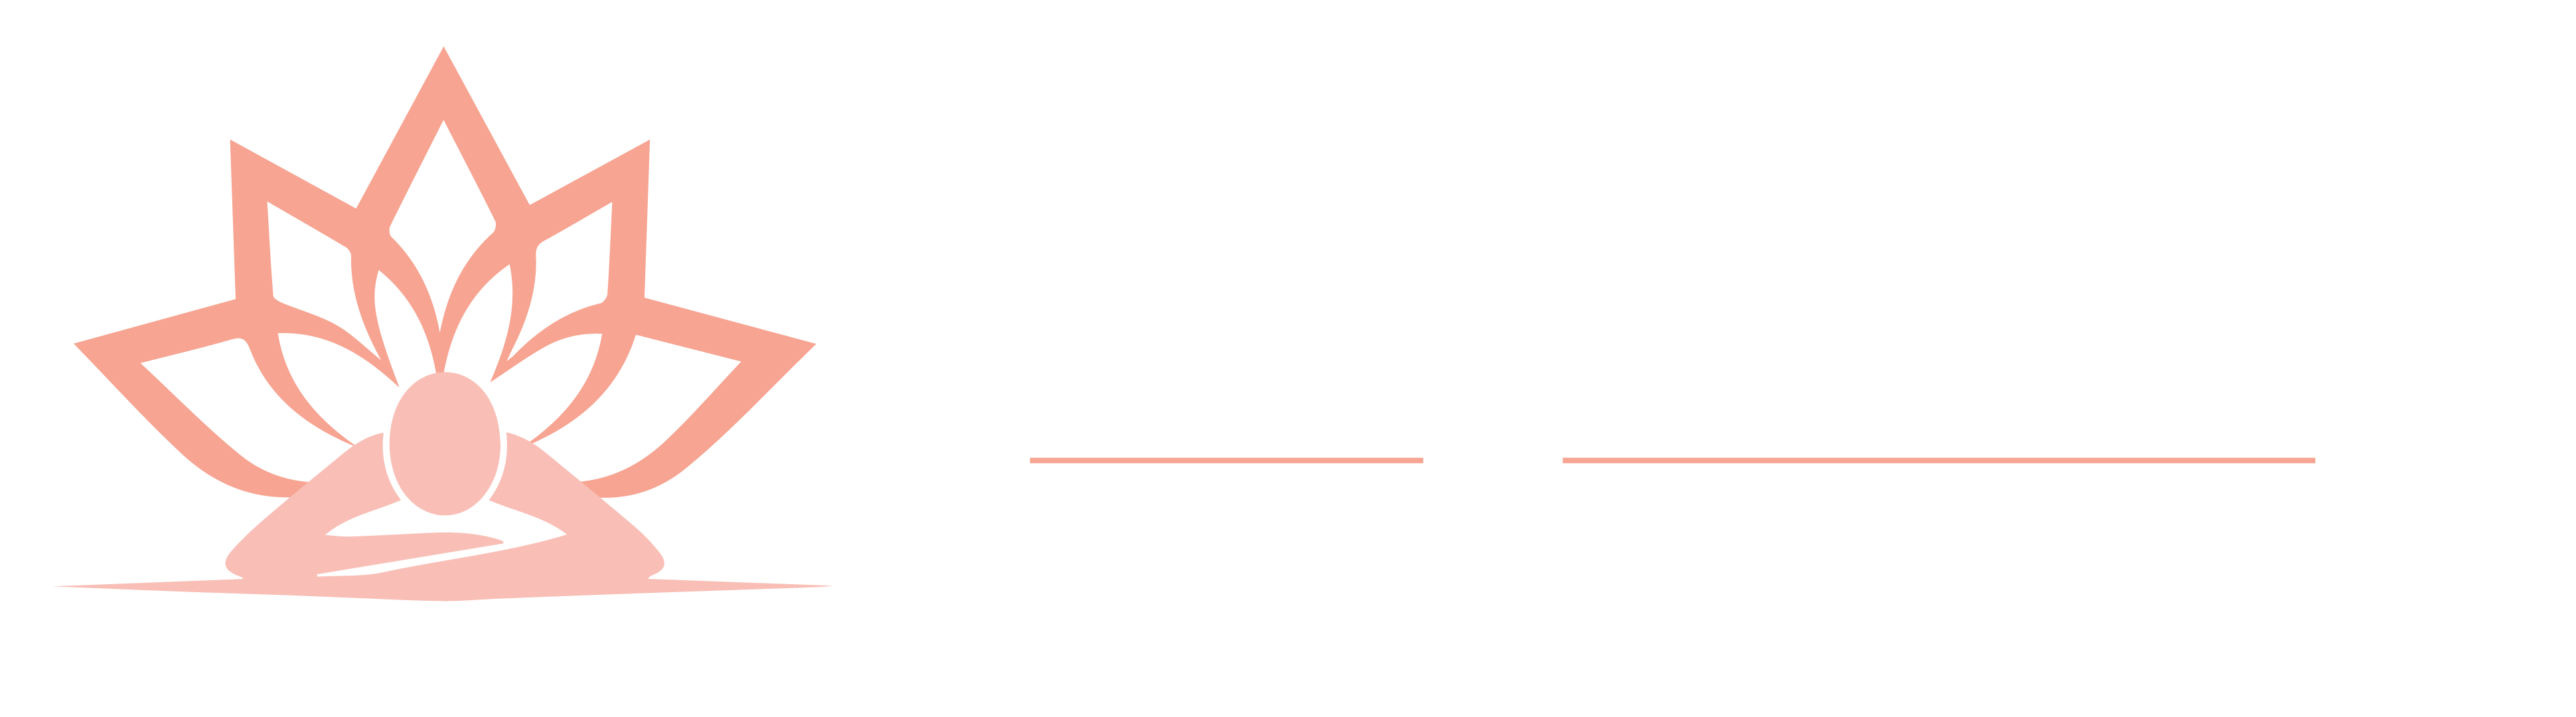 Couple Massage in Dubai, Business Bay | Blue Bee Valley